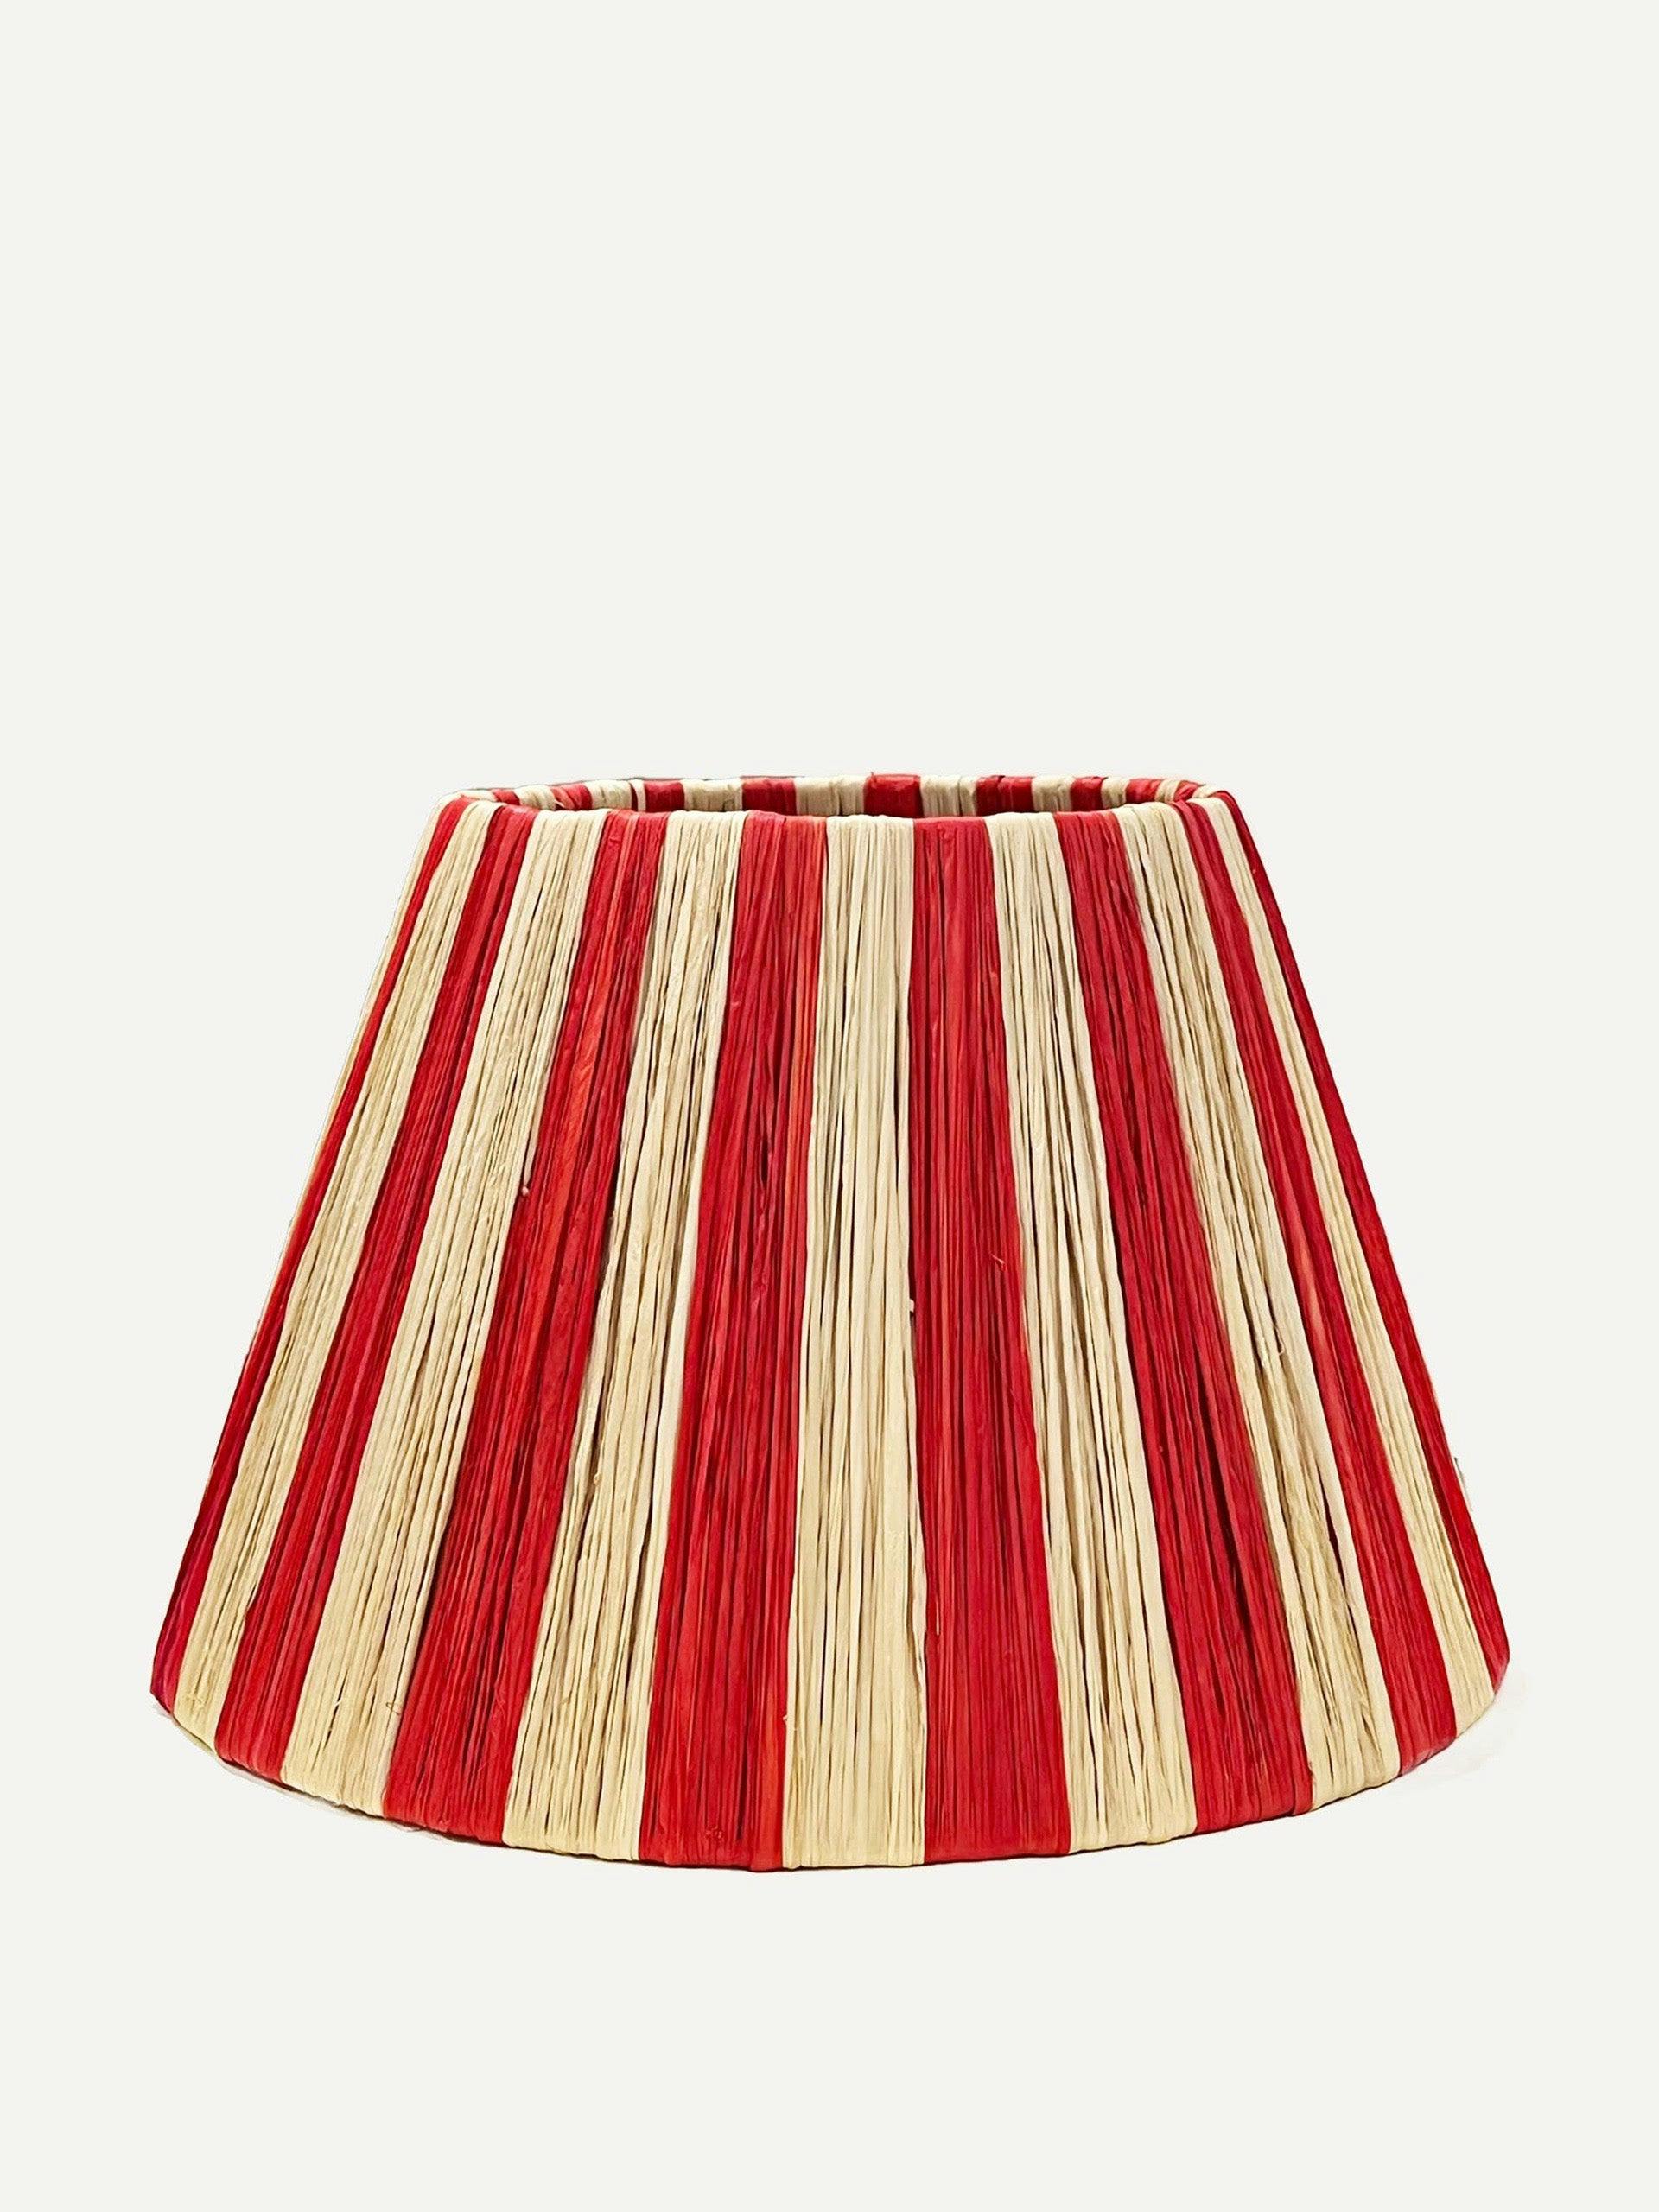 The Tangier striped lampshade